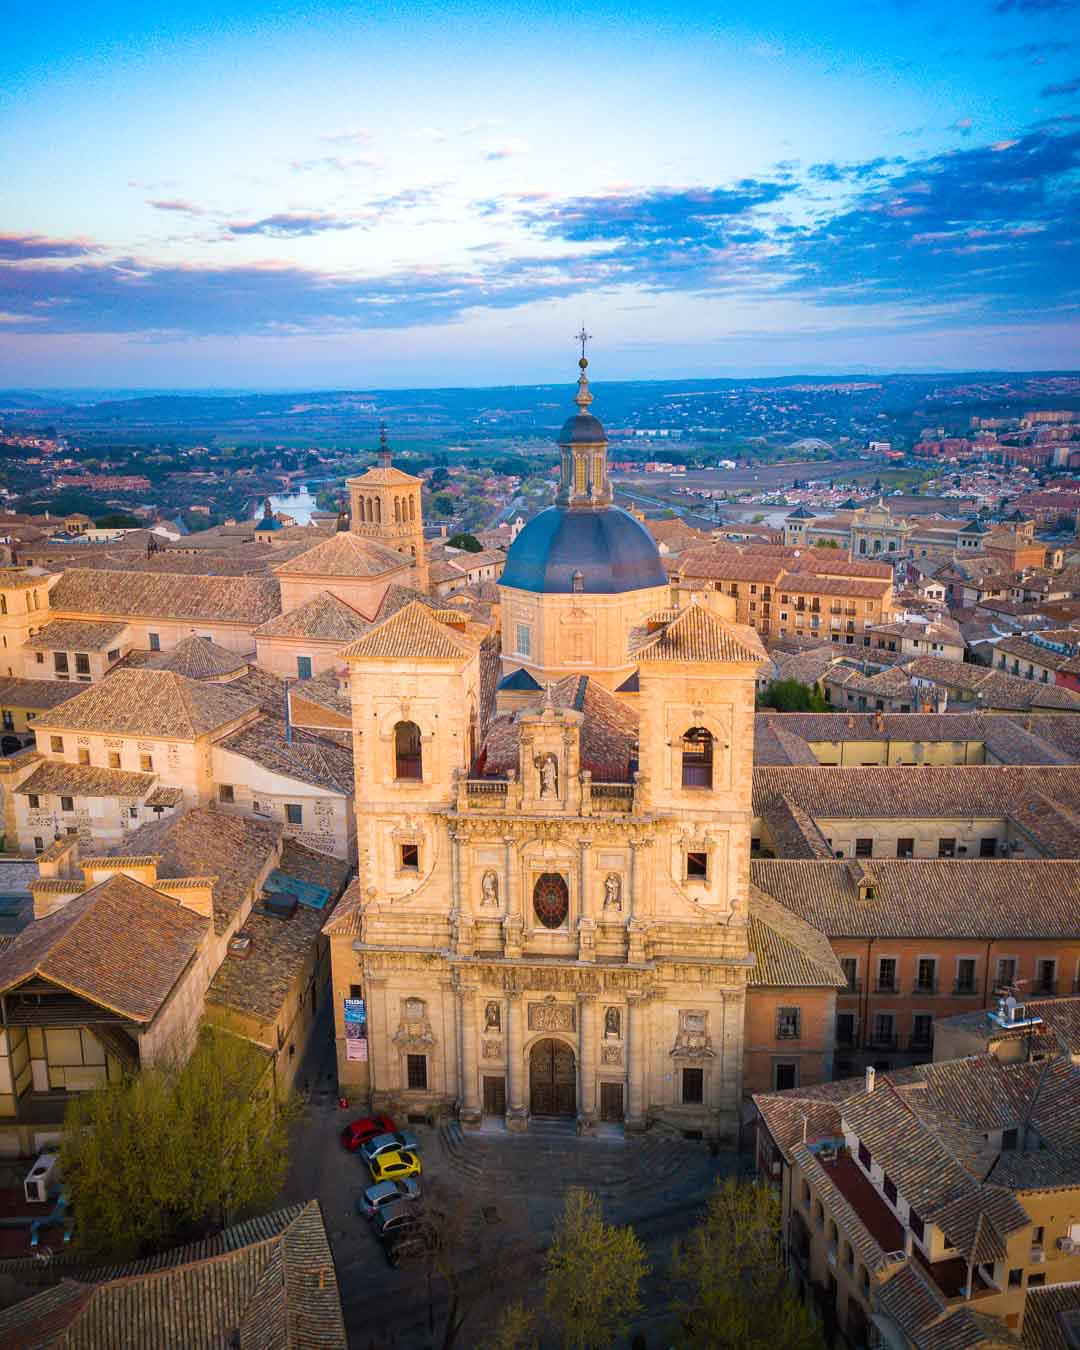 iglesia de los jesuitas from above on a day trip to toledo from madrid